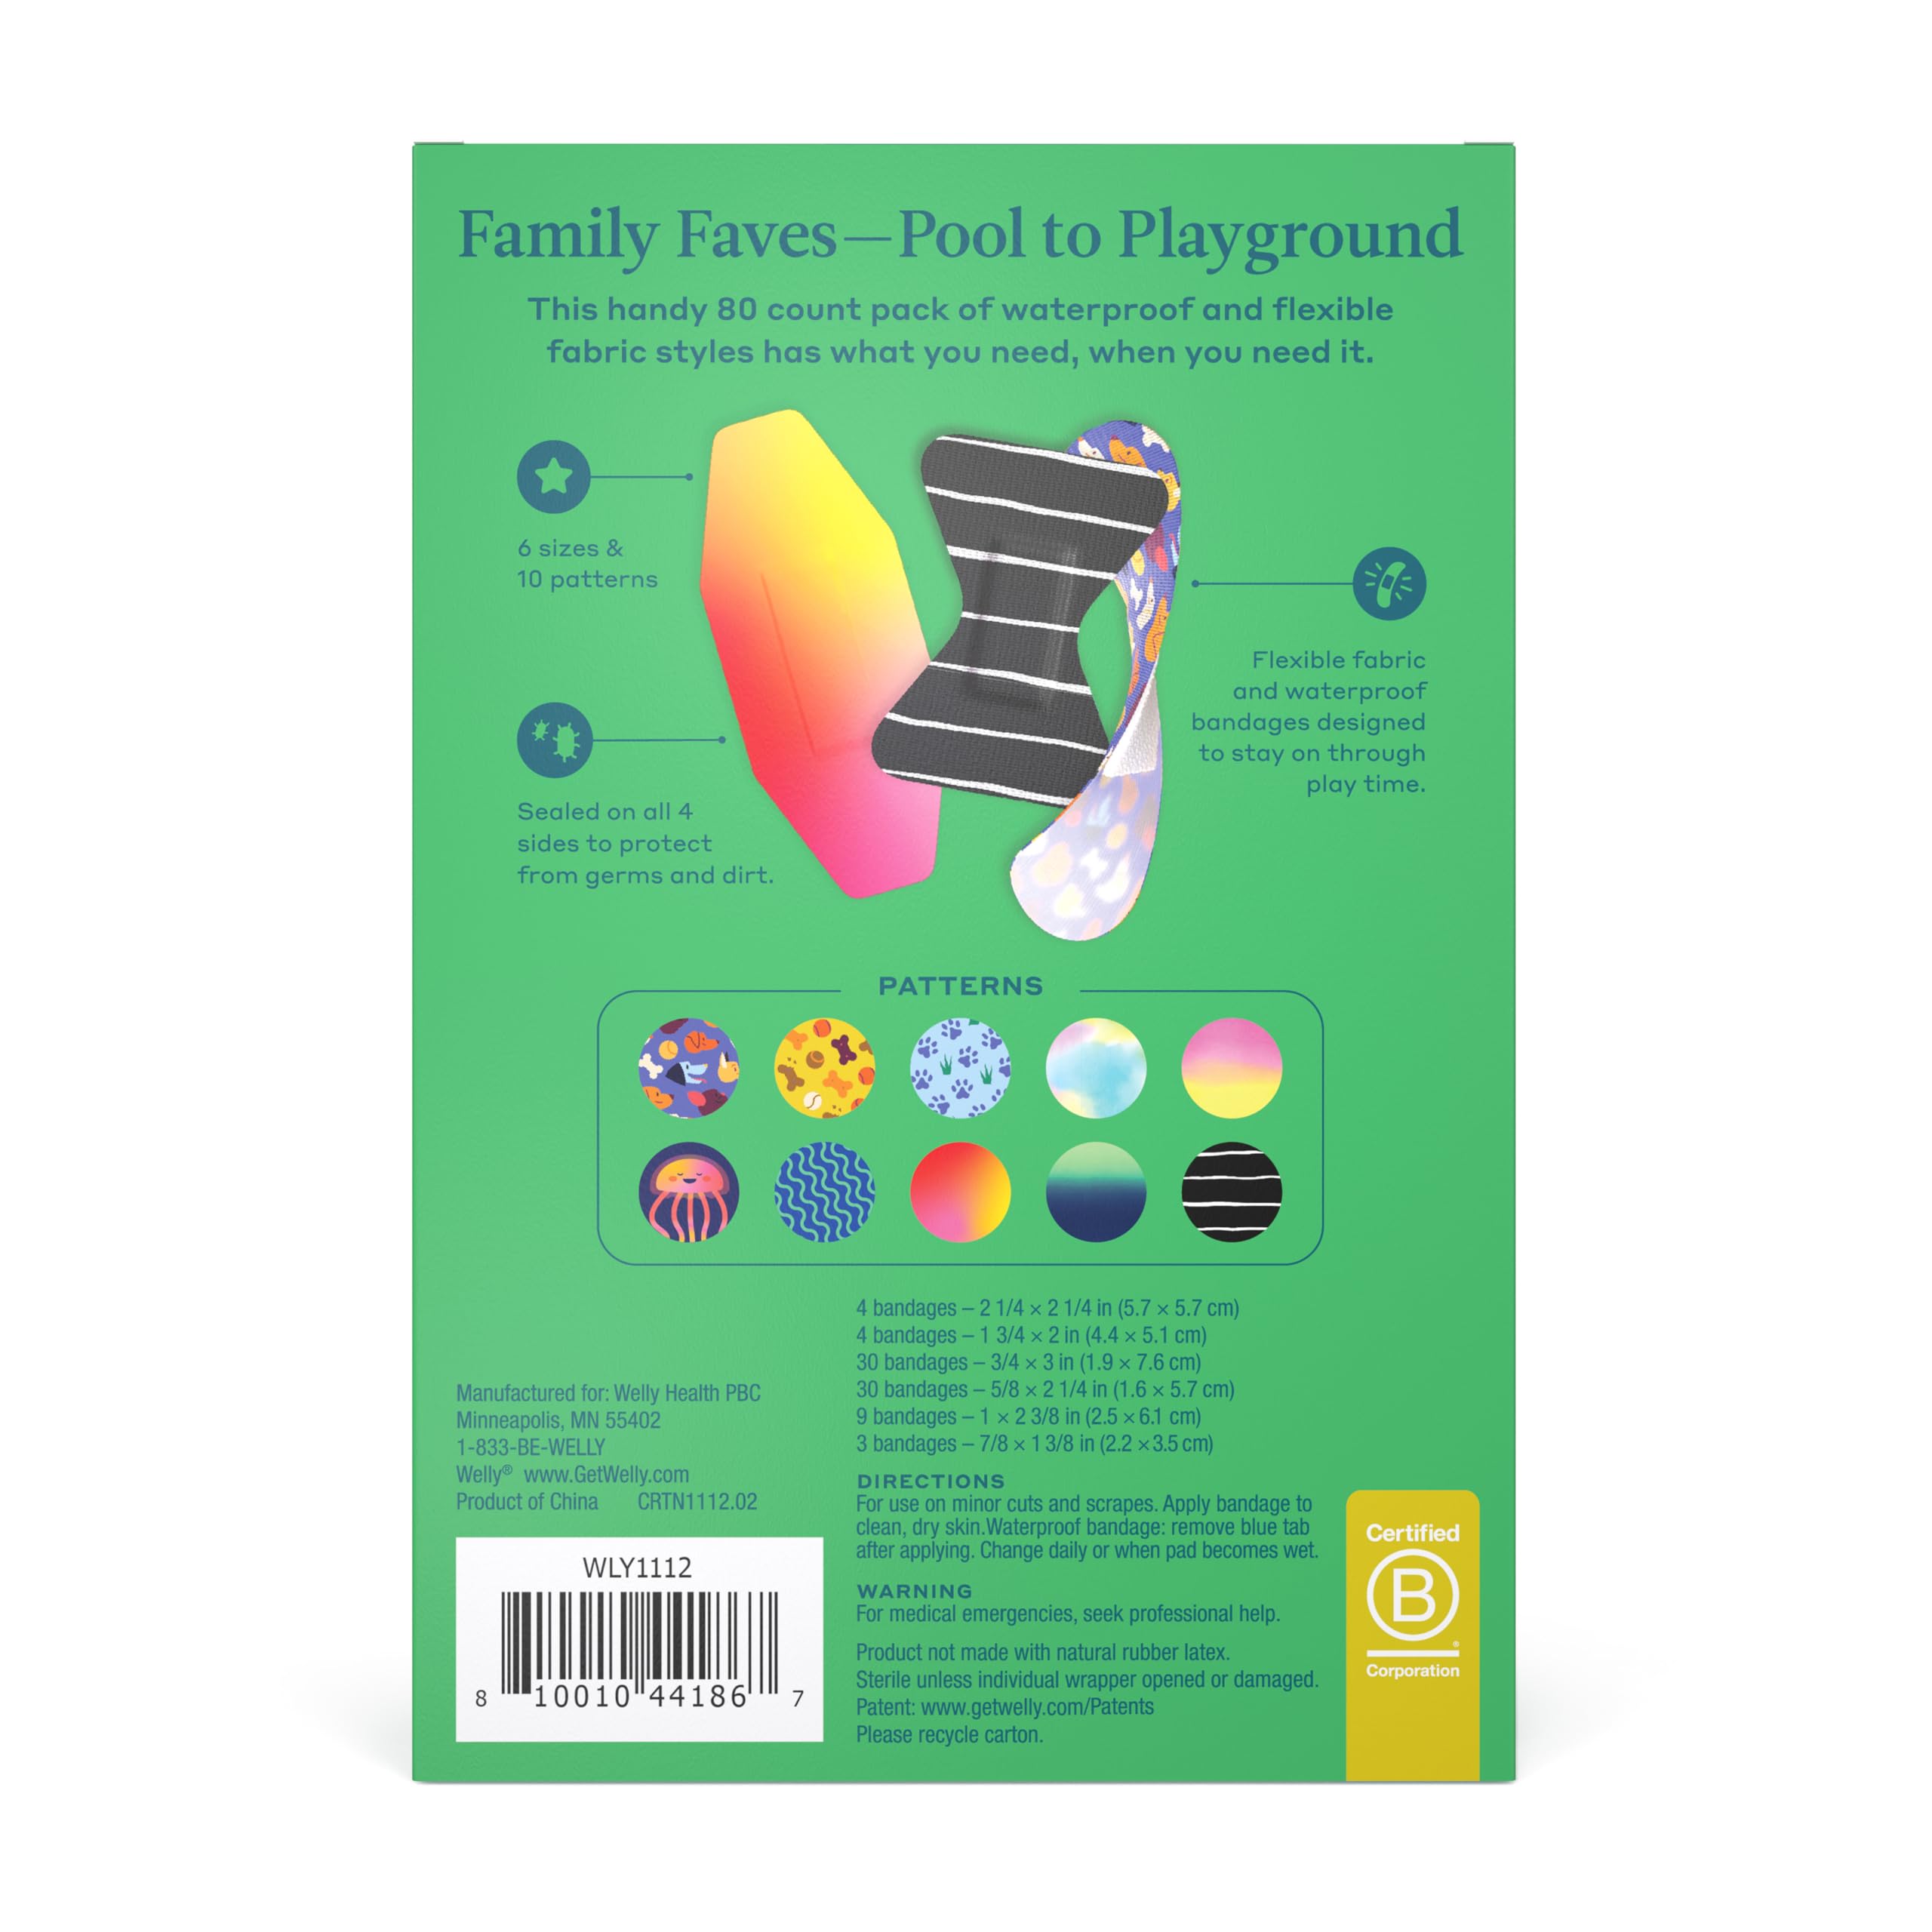 Welly Bandage Family Pack | Adhesive Flexible Fabric & Waterproof Bandages | Assorted Shapes and Patterns for Minor Cuts, Scrapes, and Wounds - 80 Count